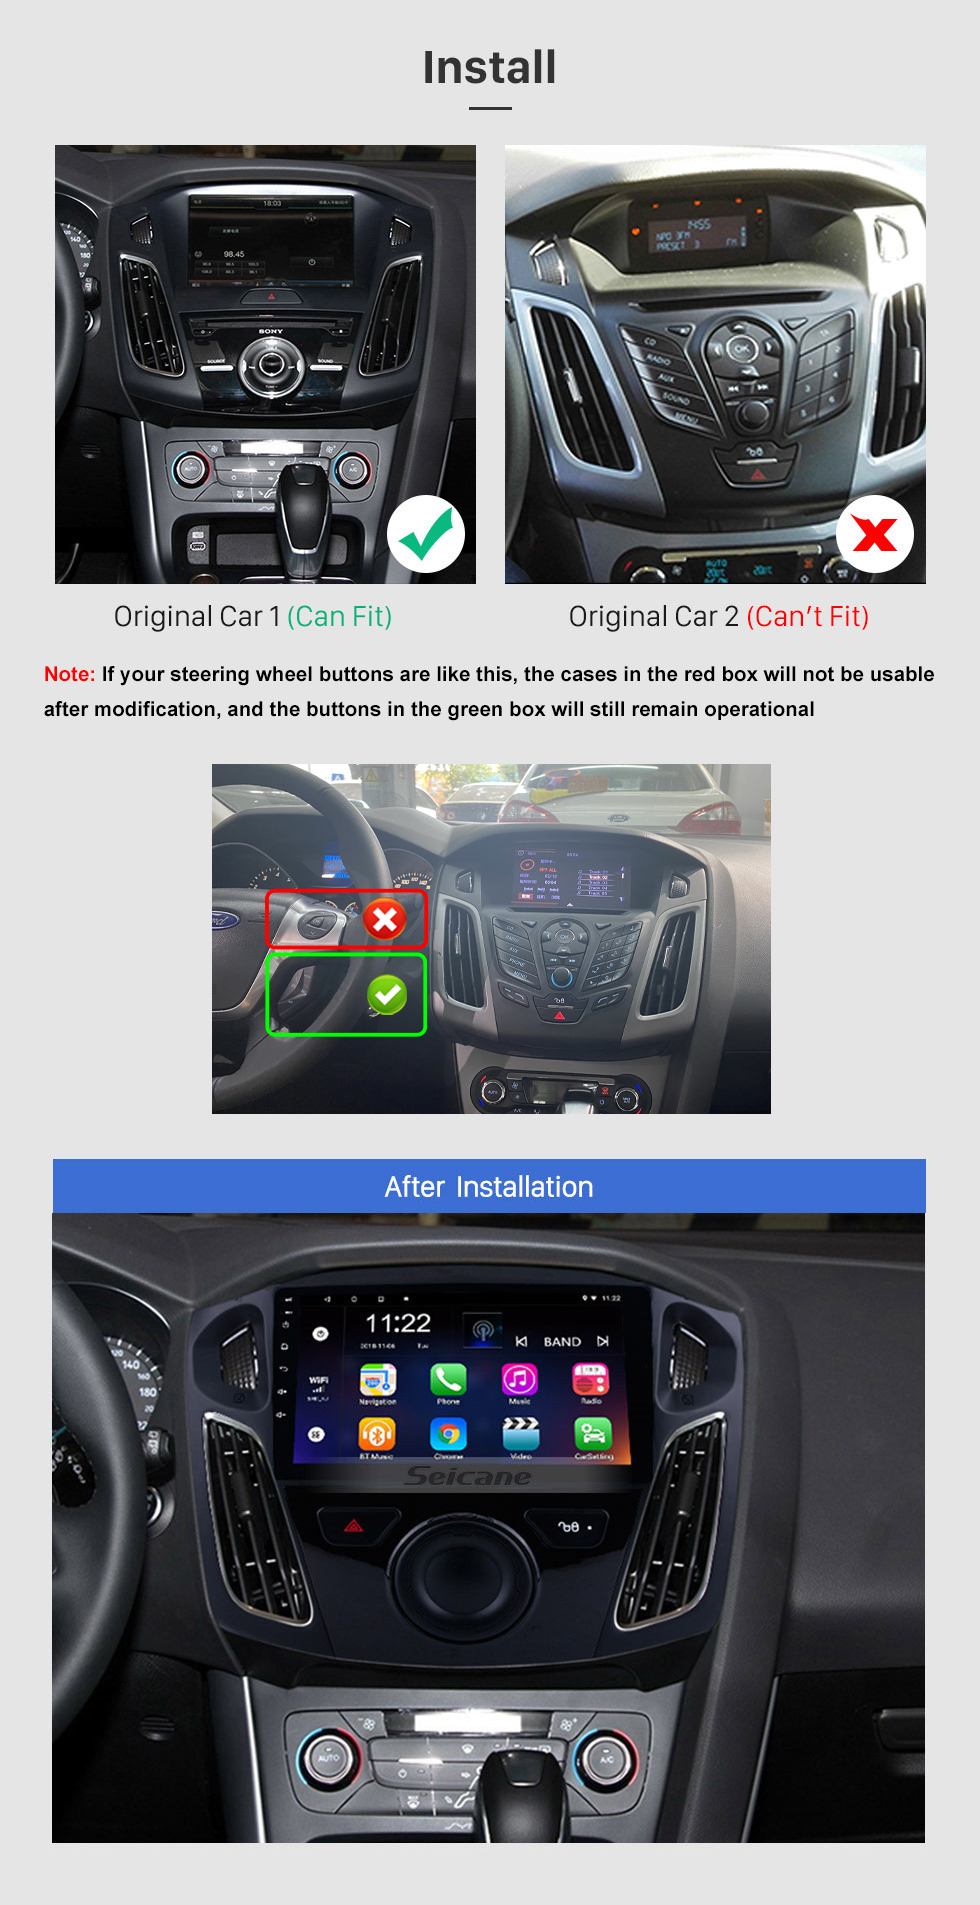 Seicane 9 inch Android 13.0 GPS Navigation HD 1024*600 Touchscreen Radio for 2011 2012-2015 Ford Focus with Bluetooth WIFI 1080P USB Mirror Link OBD2 DVR Steering Wheel Control